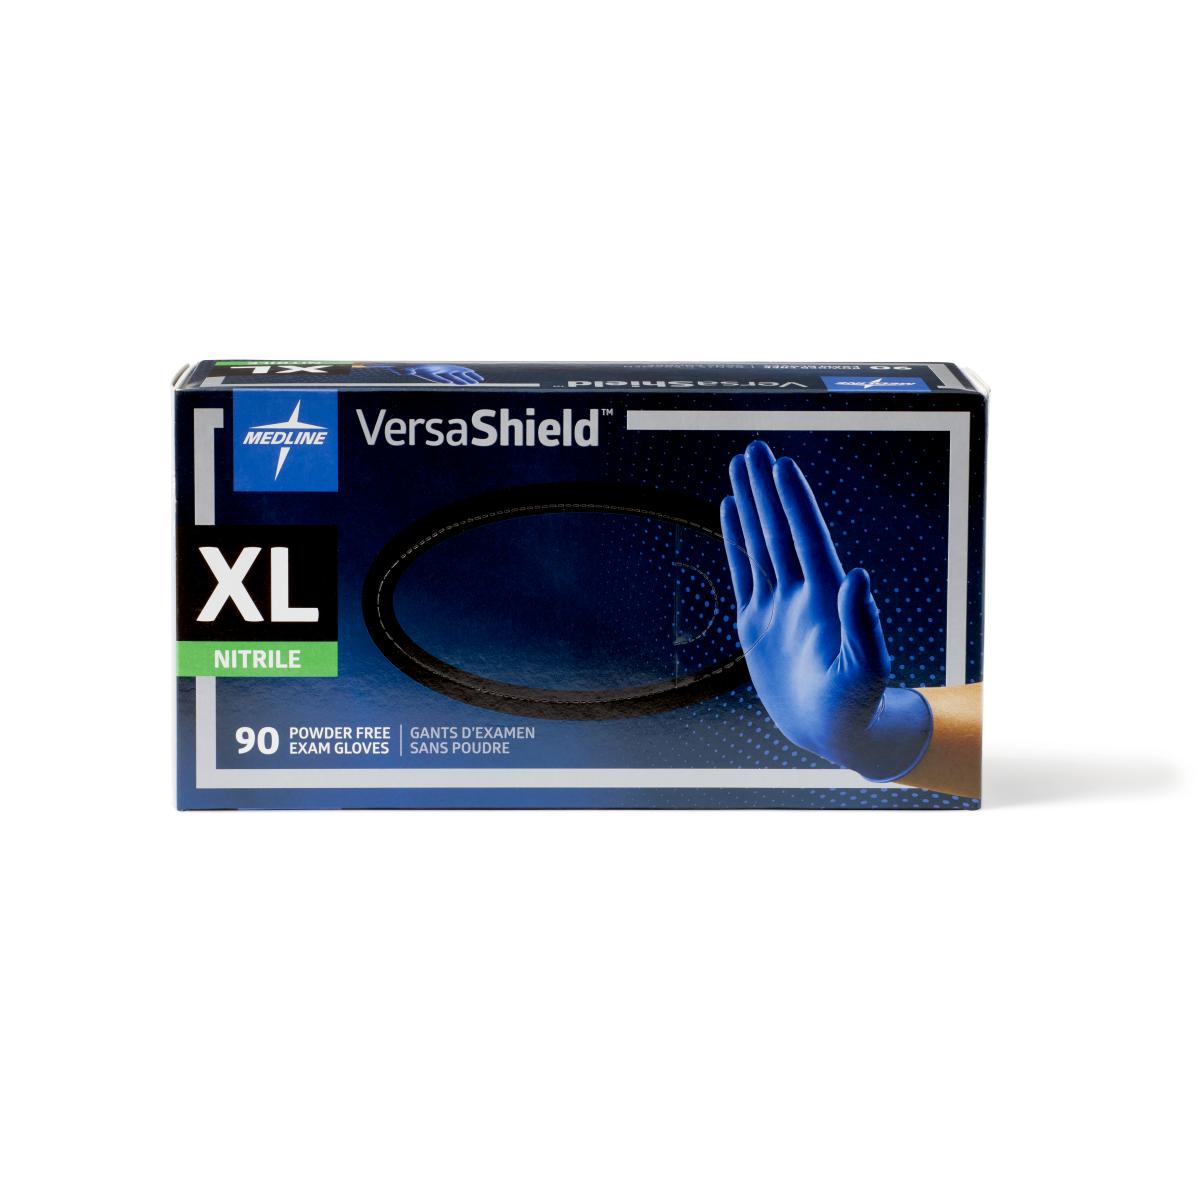 Versashield brand blue gloves in blue box - extra large size